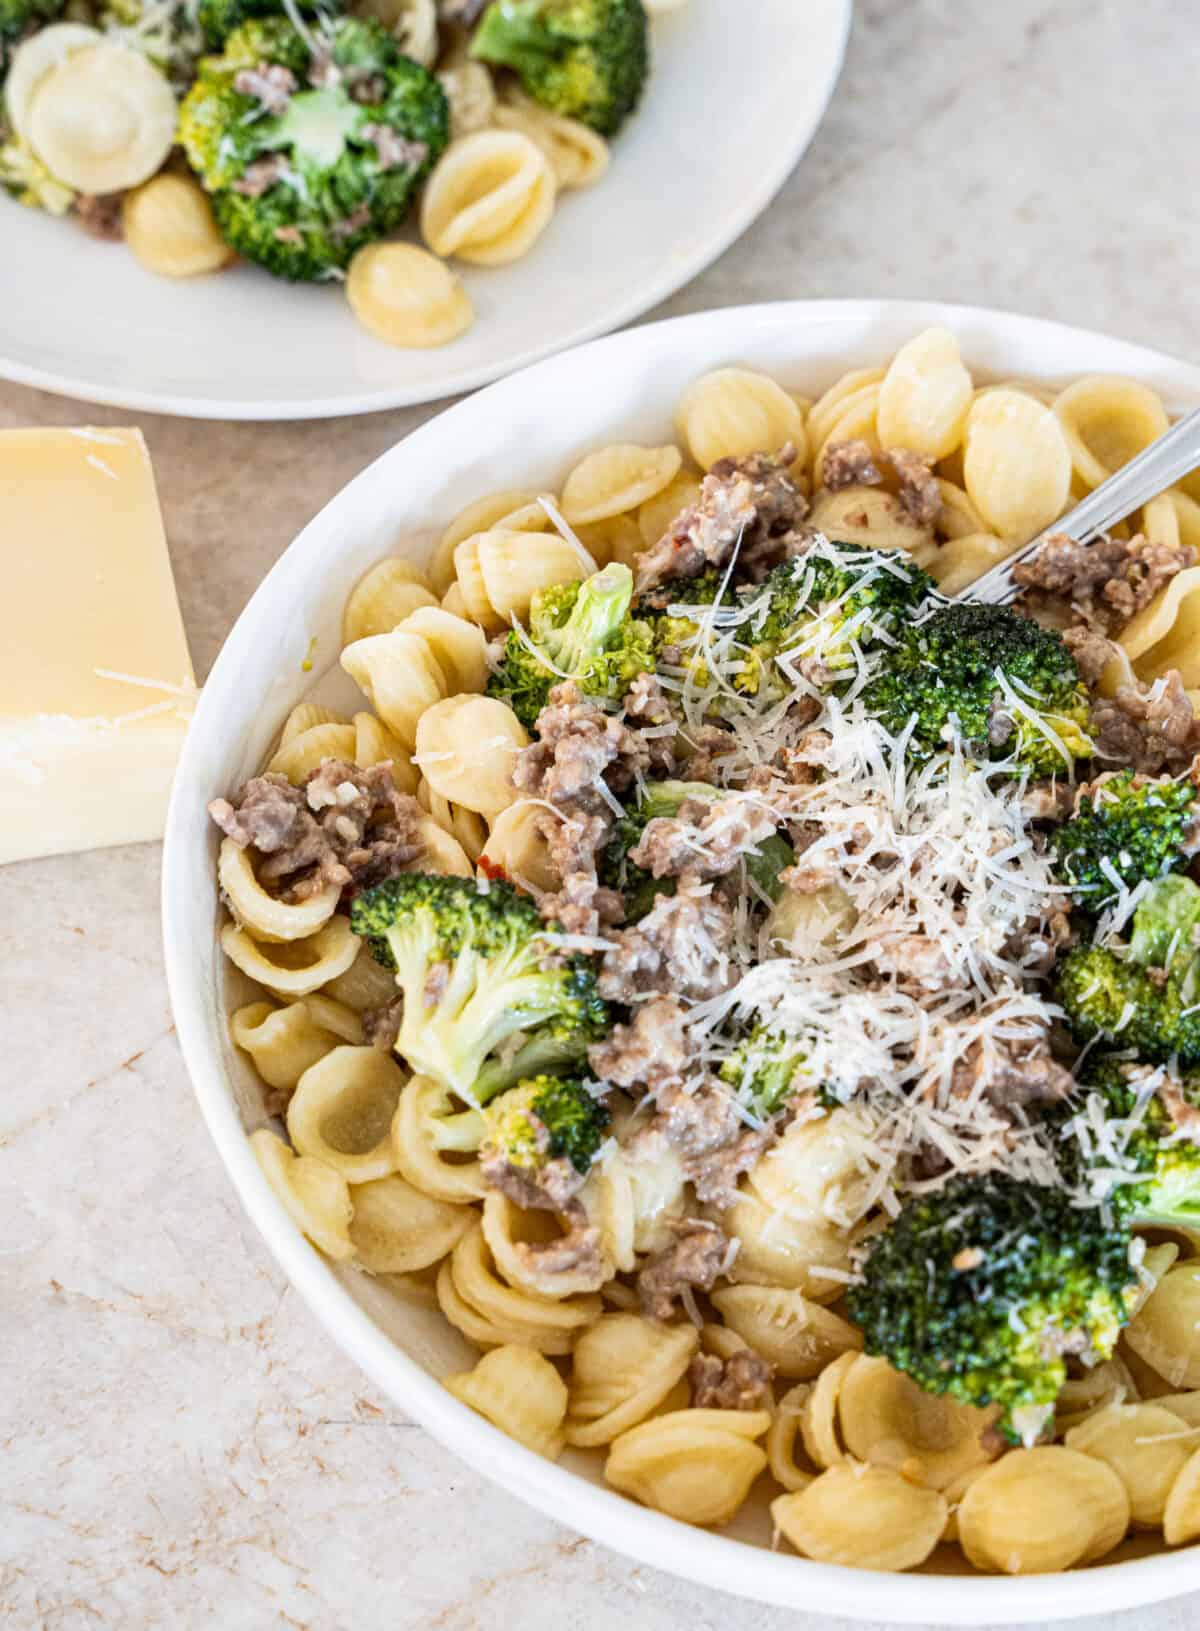 Orecchiette pasta topped with italian sausage, broccoli, and shredded parmesean cheese